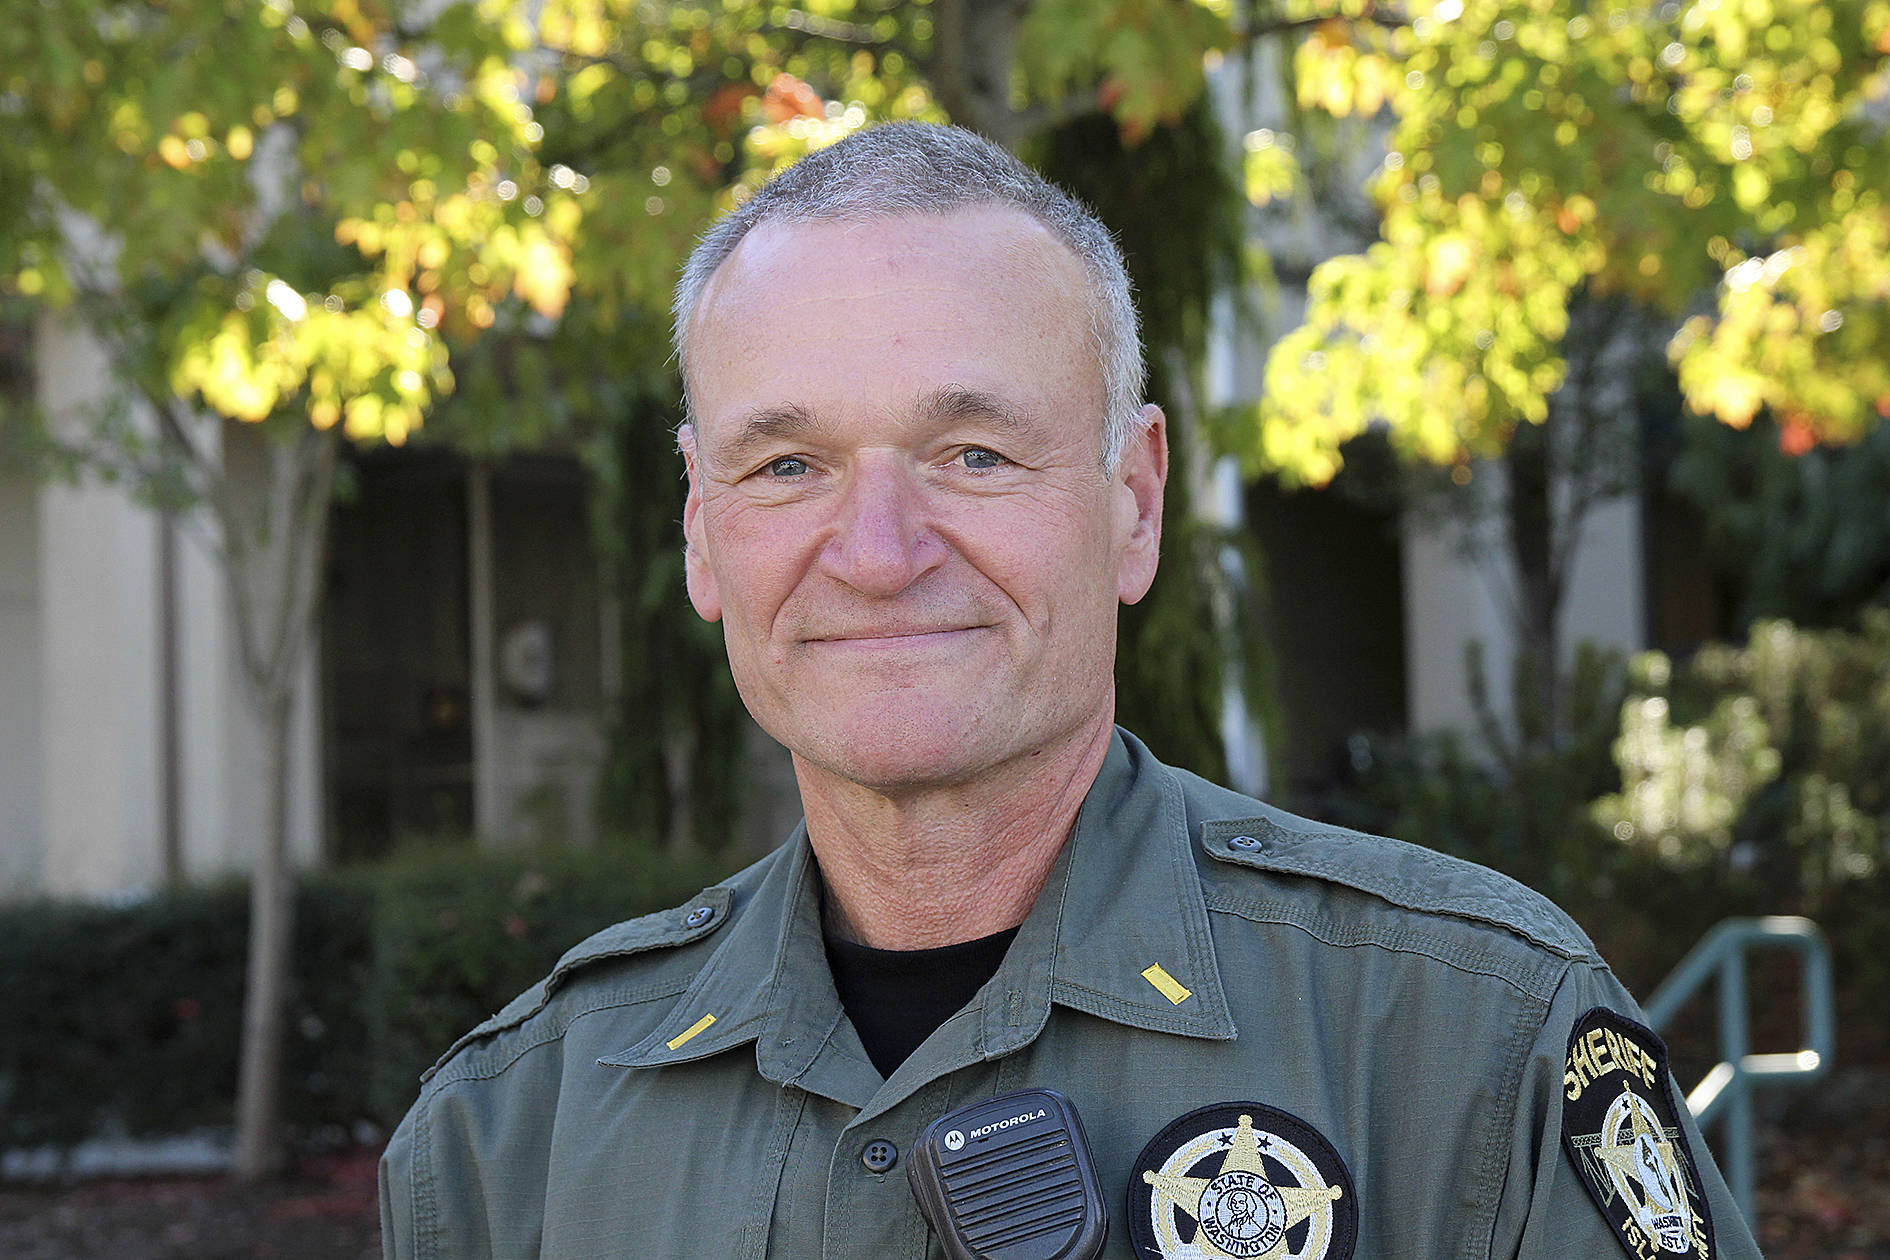 file photo                                 Lt. Mike Hawley is taking over as the commander of the South Whidbey precinct for the Island County Sheriff’s Office.